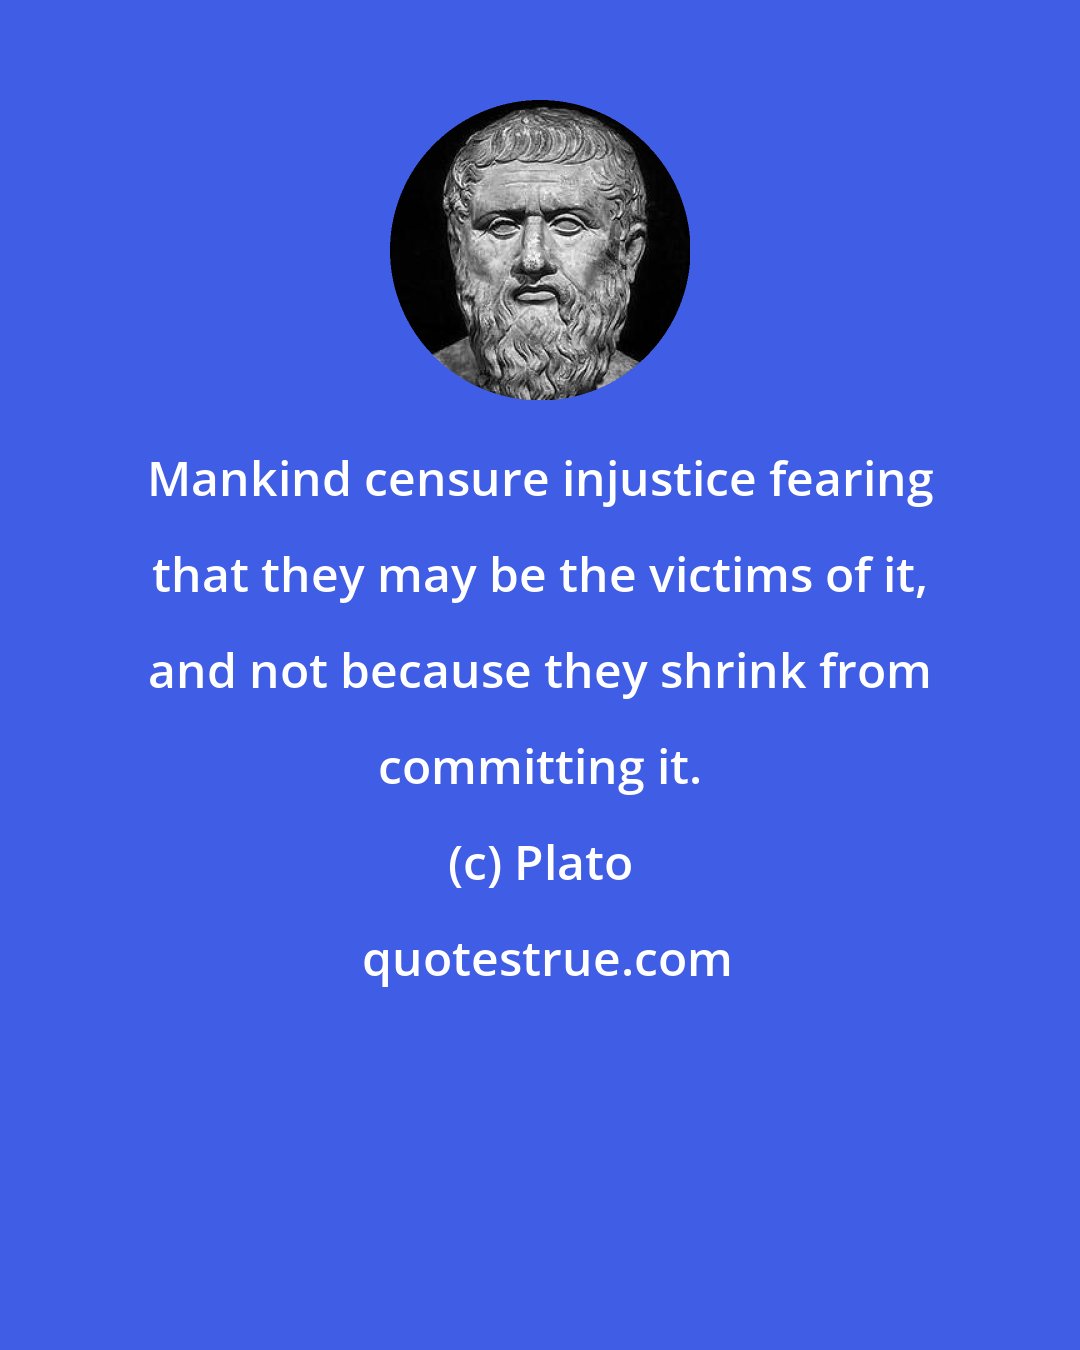 Plato: Mankind censure injustice fearing that they may be the victims of it, and not because they shrink from committing it.